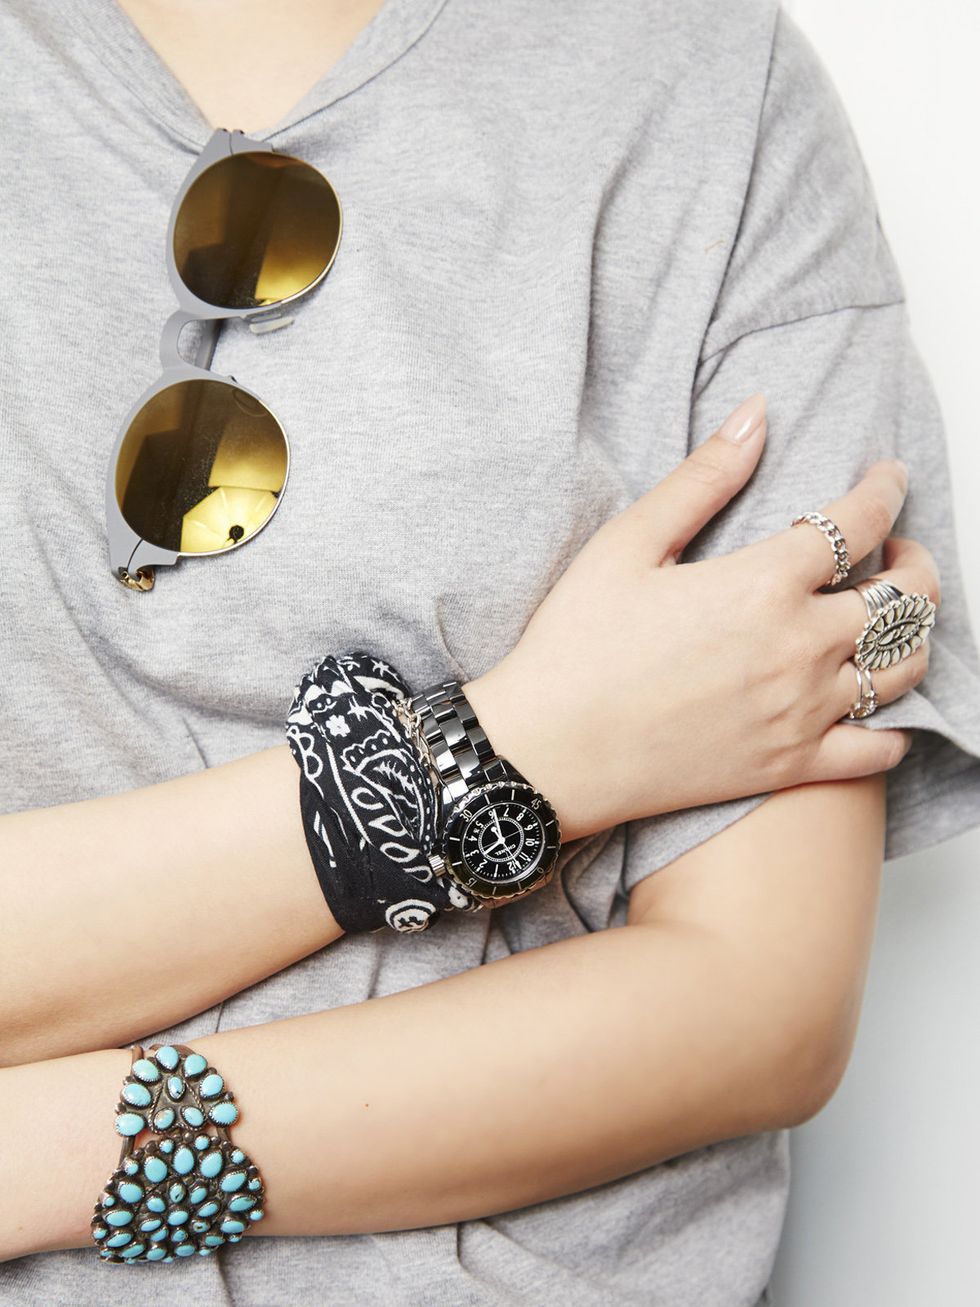 Arm, Finger, Sleeve, Wrist, Pattern, Hand, Nail, Style, Fashion accessory, Collar, 